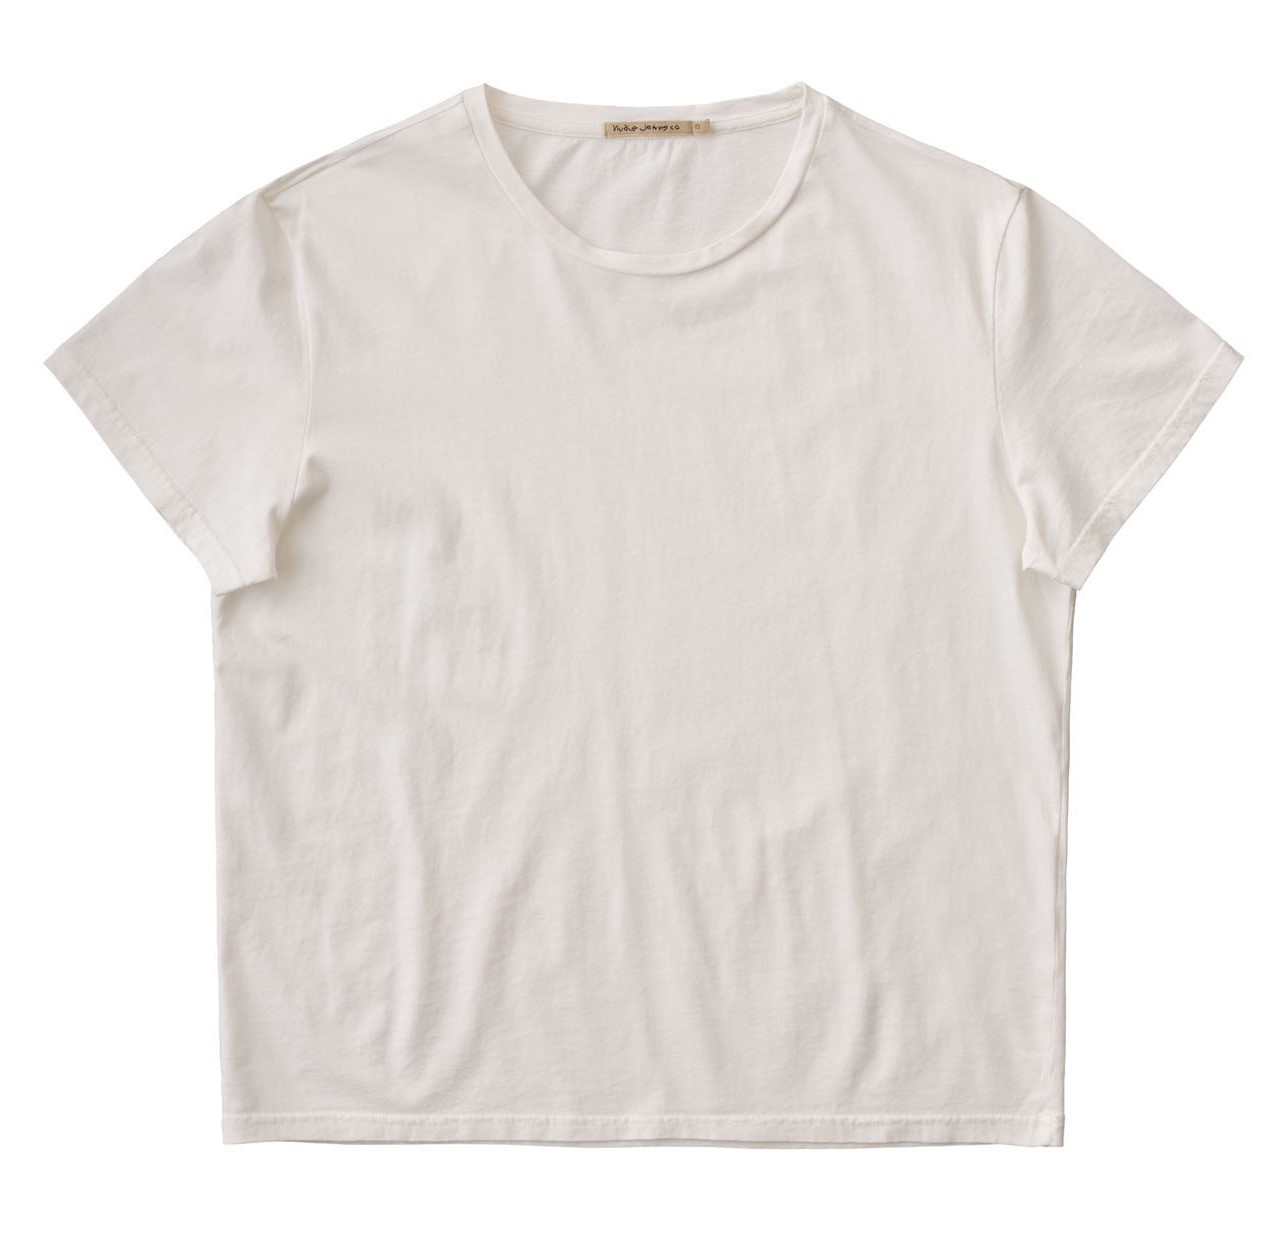 Nudie Jeans - LISA T-SHIRT - Off White